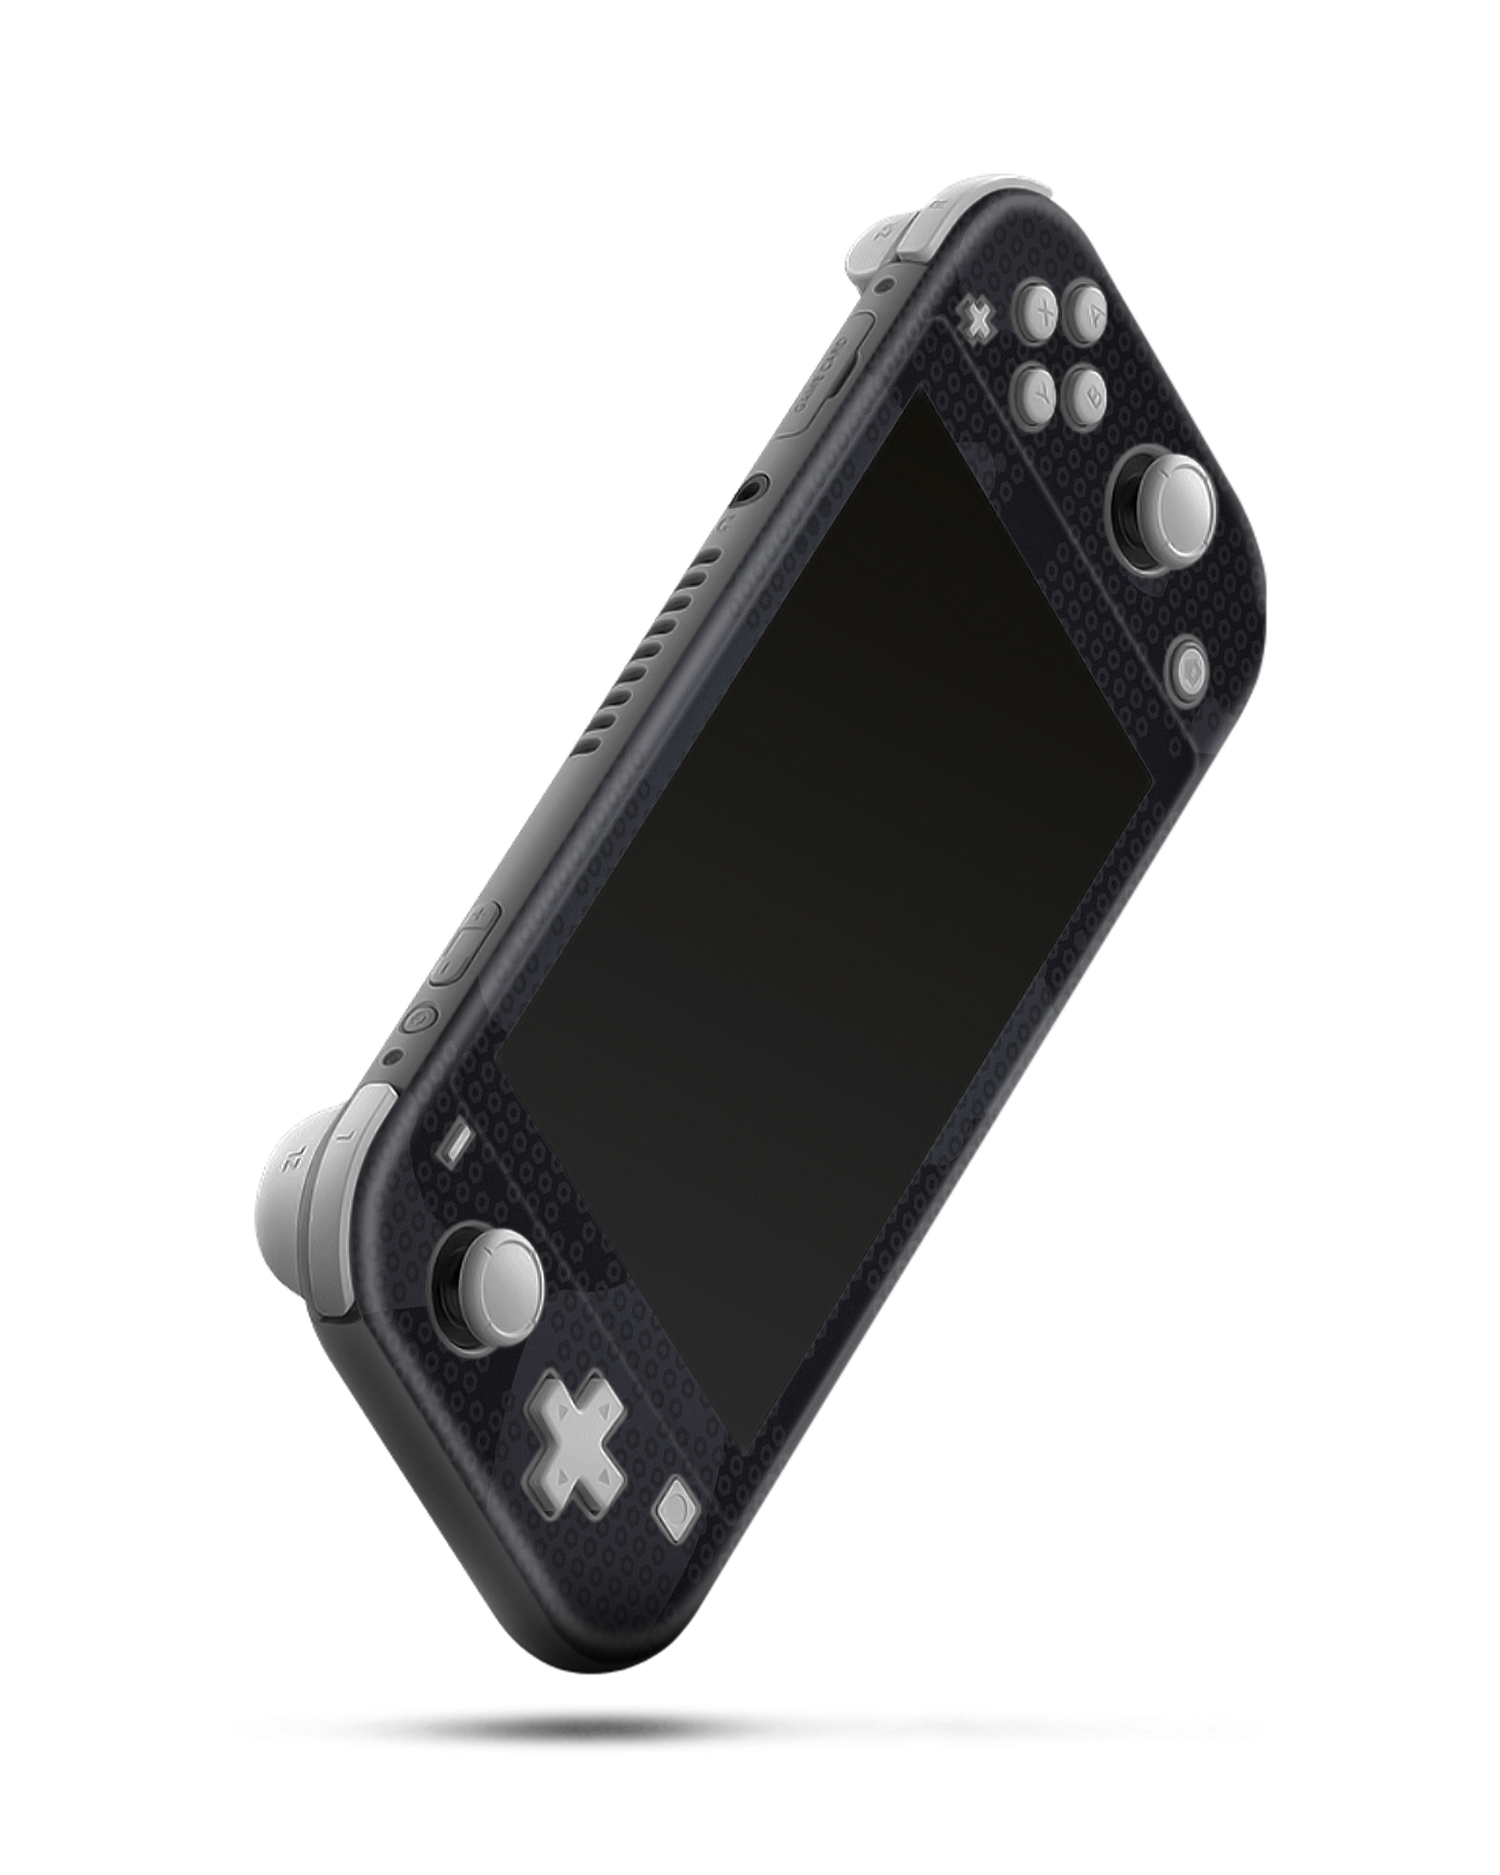 Spec Ops Dark Console Skin for Nintendo Switch Lite: Side view